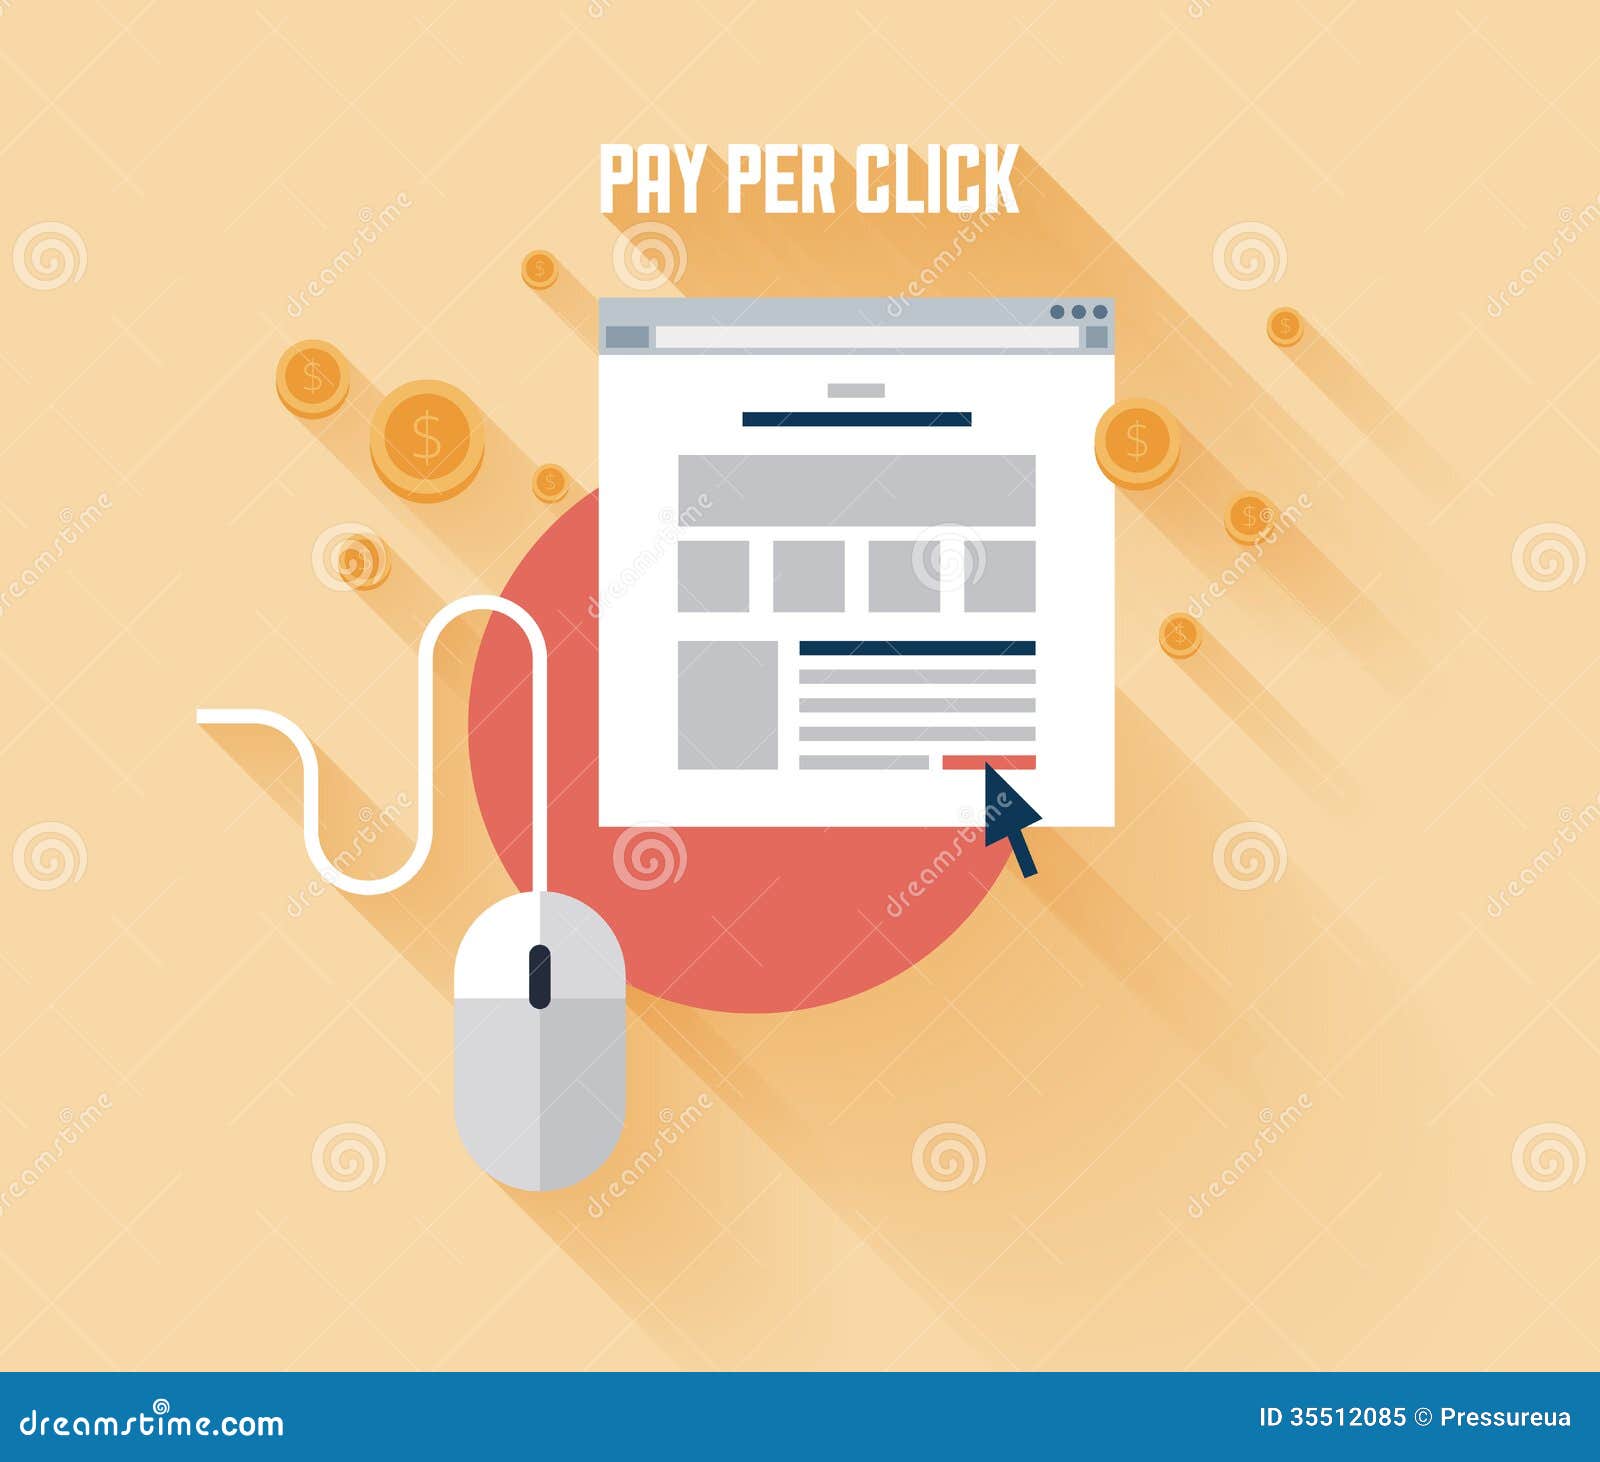 Pay Per Click Concept Illustration Royalty Free Stock ...